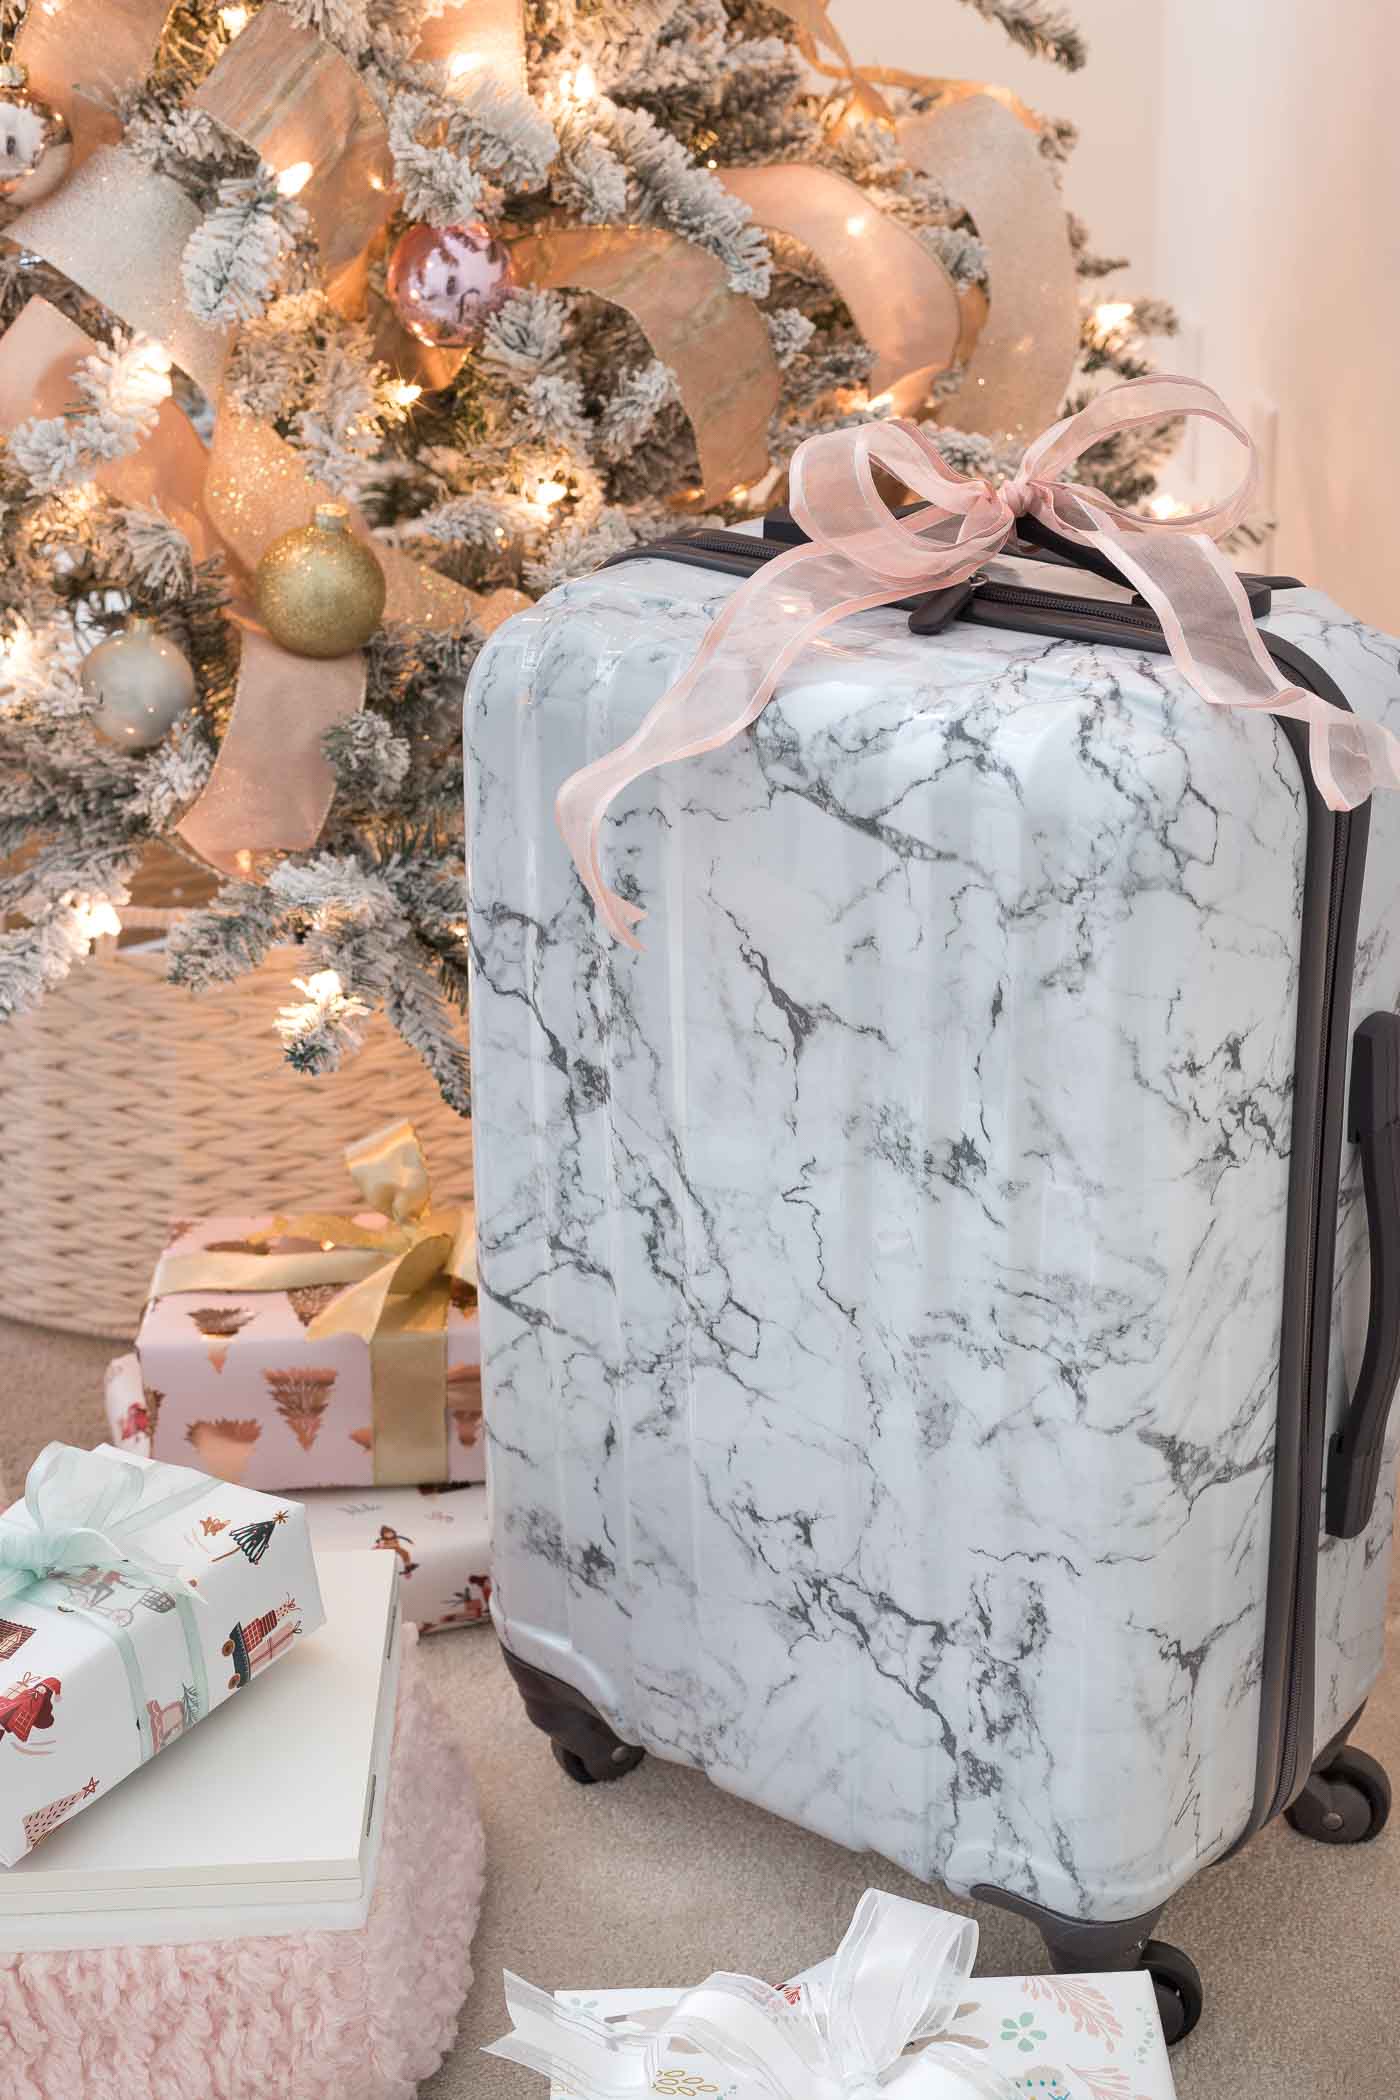 https://www.drivenbydecor.com/wp-content/uploads/2019/11/marble-carry-on-suitcase-christmas-gift-idea-teen-girls.jpg